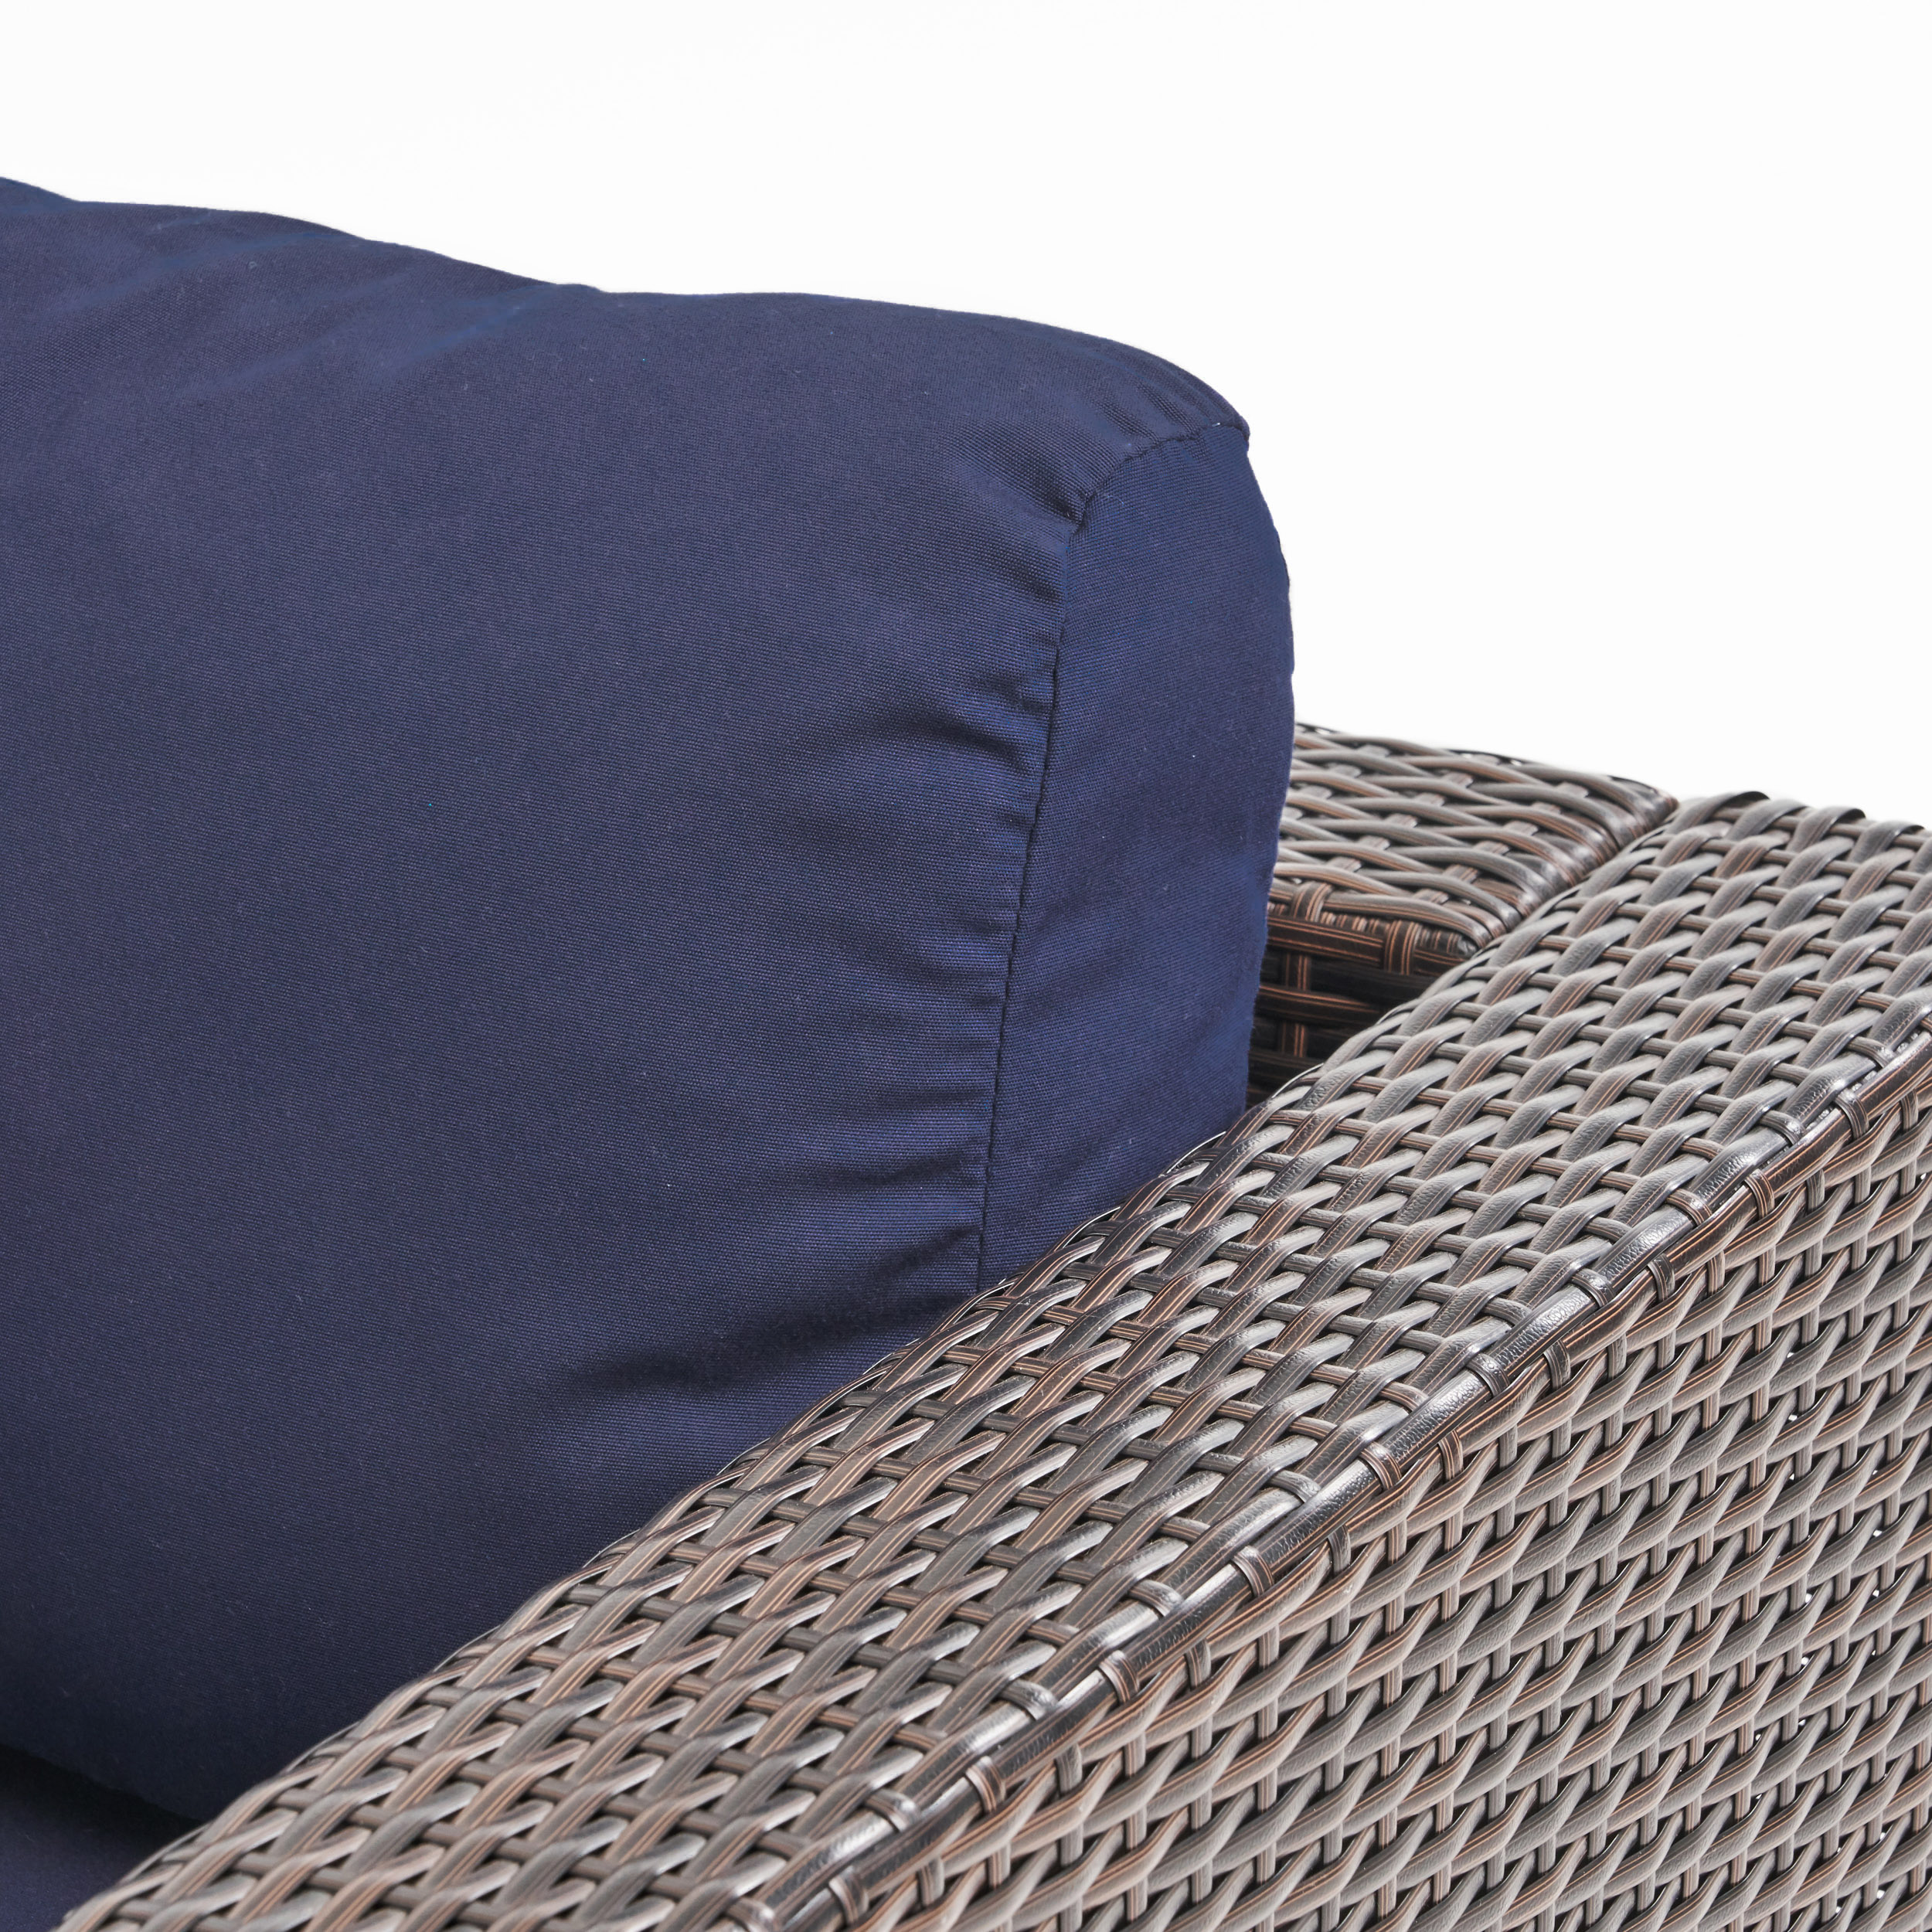 Faviola Outdoor 7 Seater Wicker Sectional Sofa Set with Sunbrella Cushions, Multibrown and Sunbrella Canvas Navy - image 4 of 10